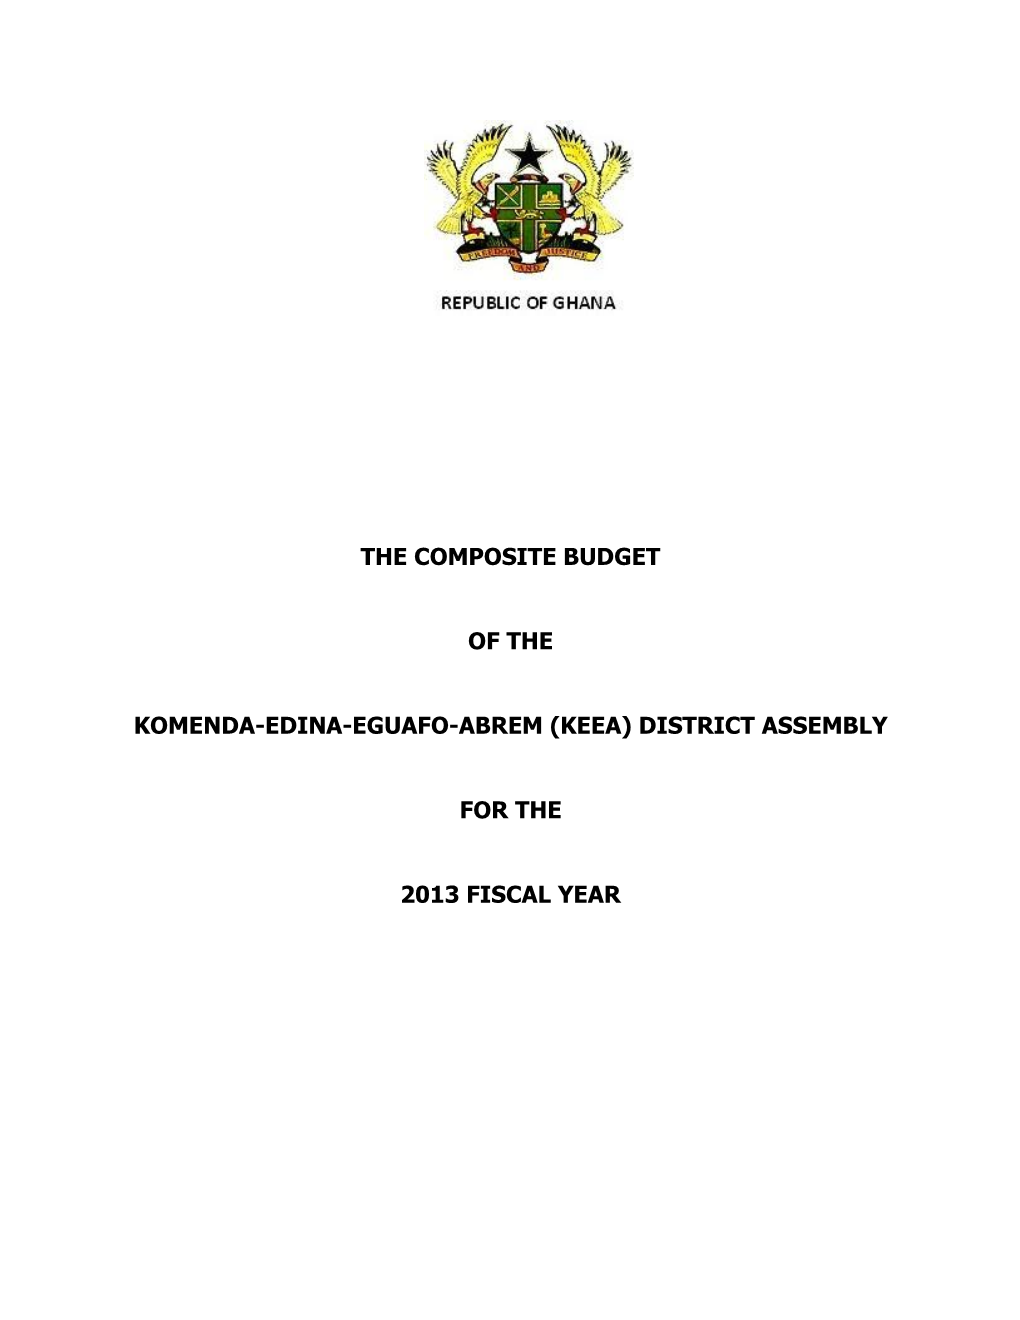 The Composite Budget of the Komenda-Edina-Eguafo-Abrem (Keea) District Assembly for the 2013 Fiscal Year